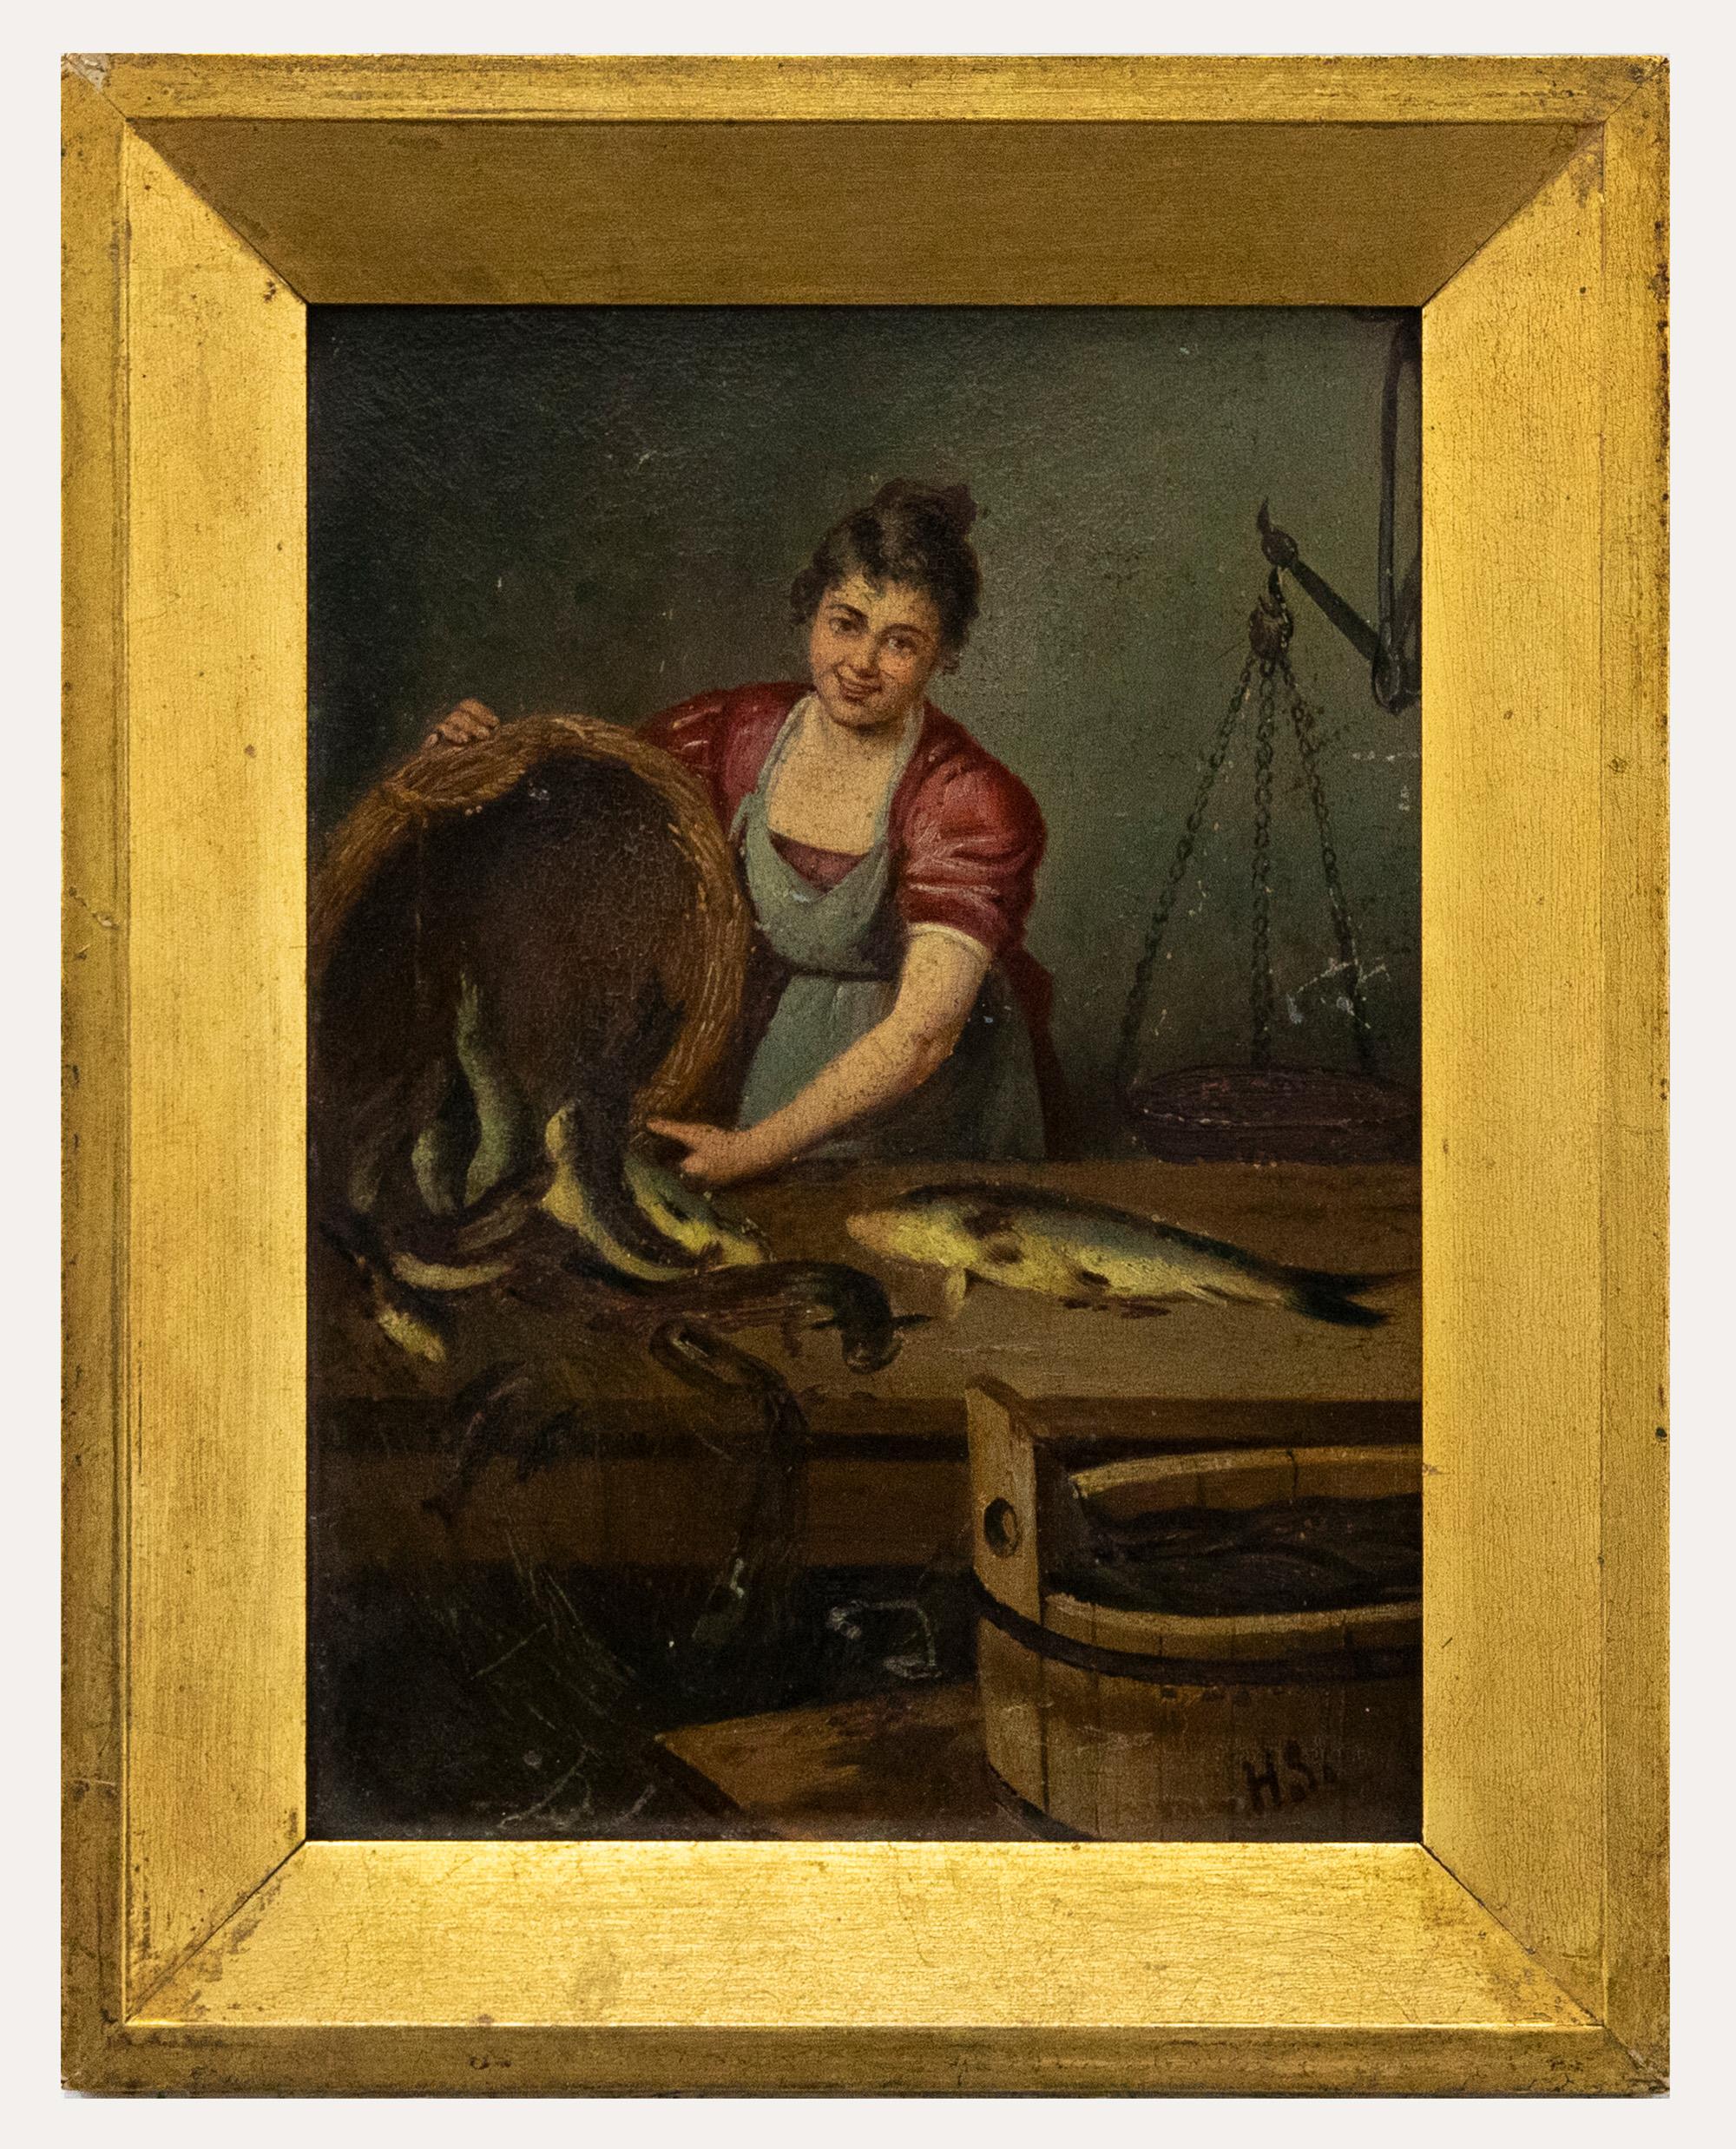 Unknown Portrait Painting - 19th Century Oil - Lady Gutting Fish